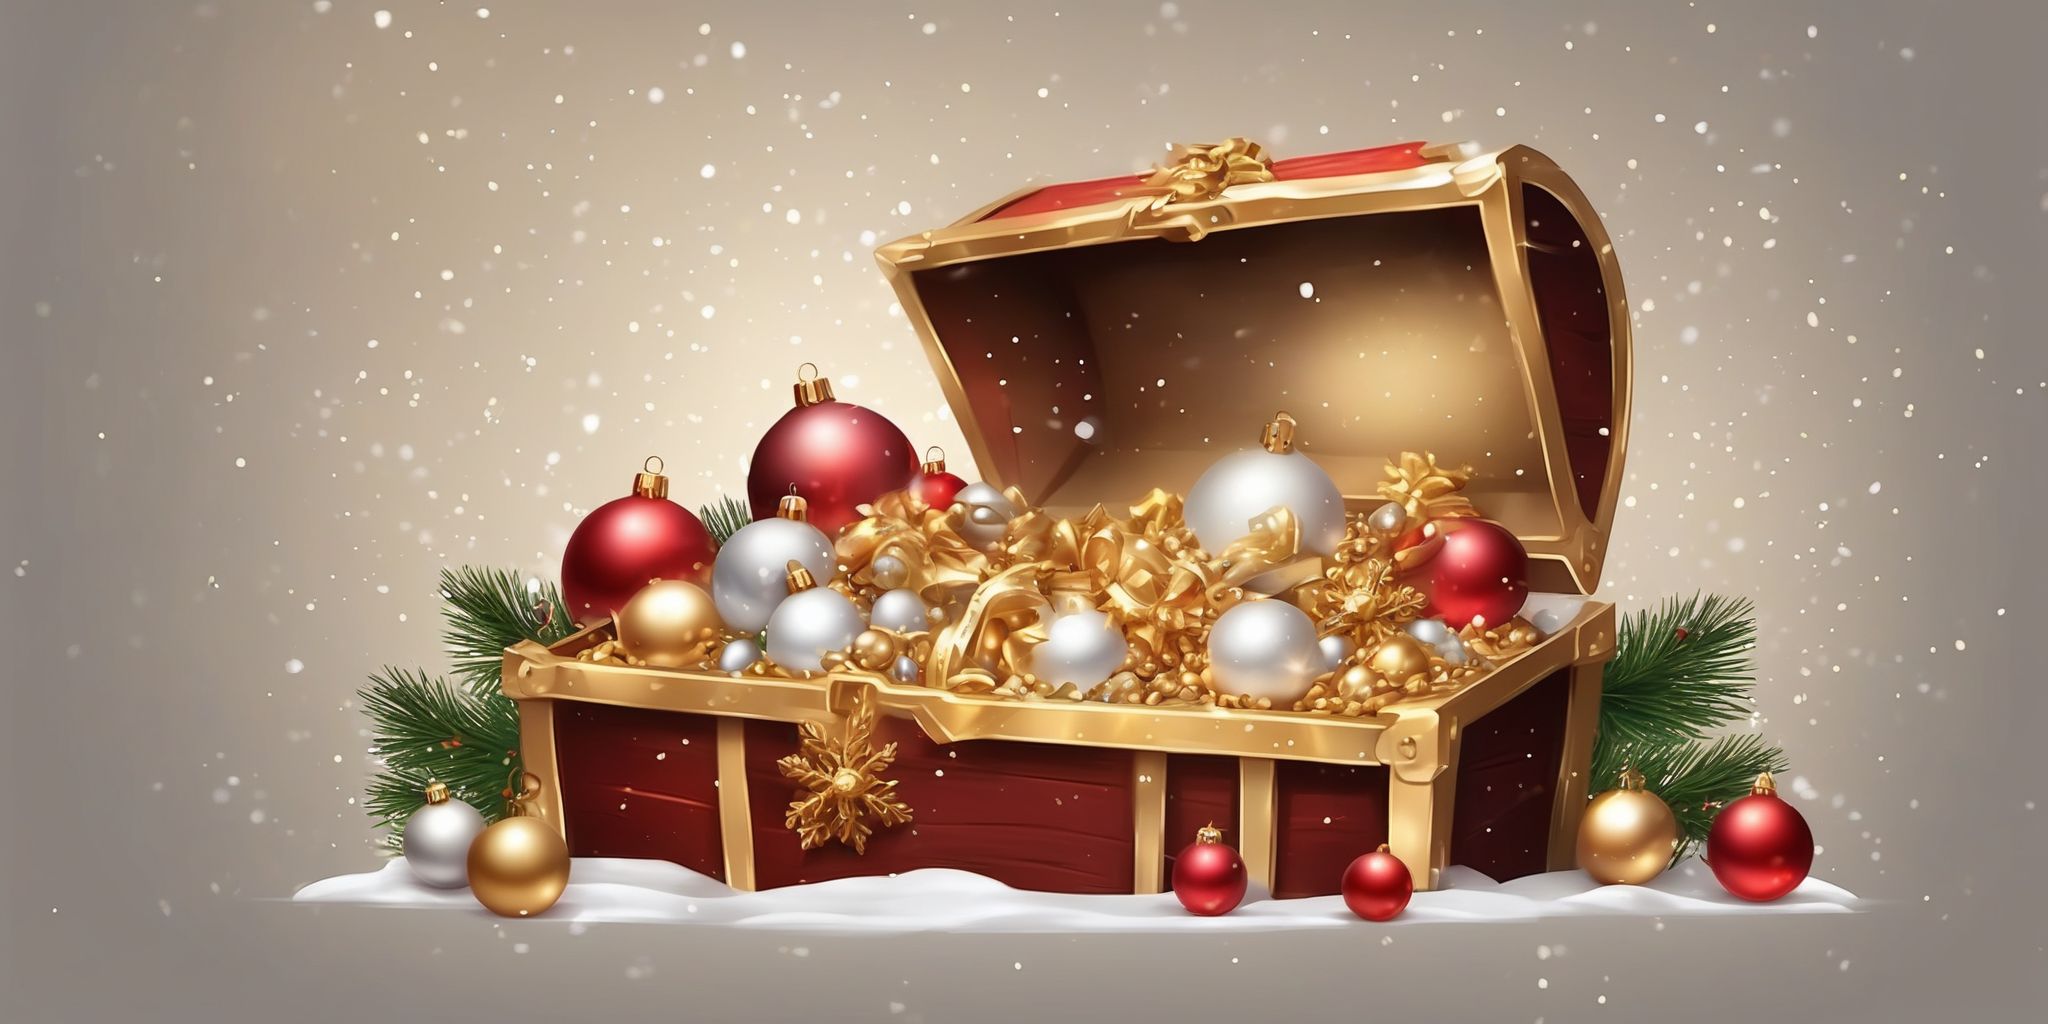 Treasure in realistic Christmas style